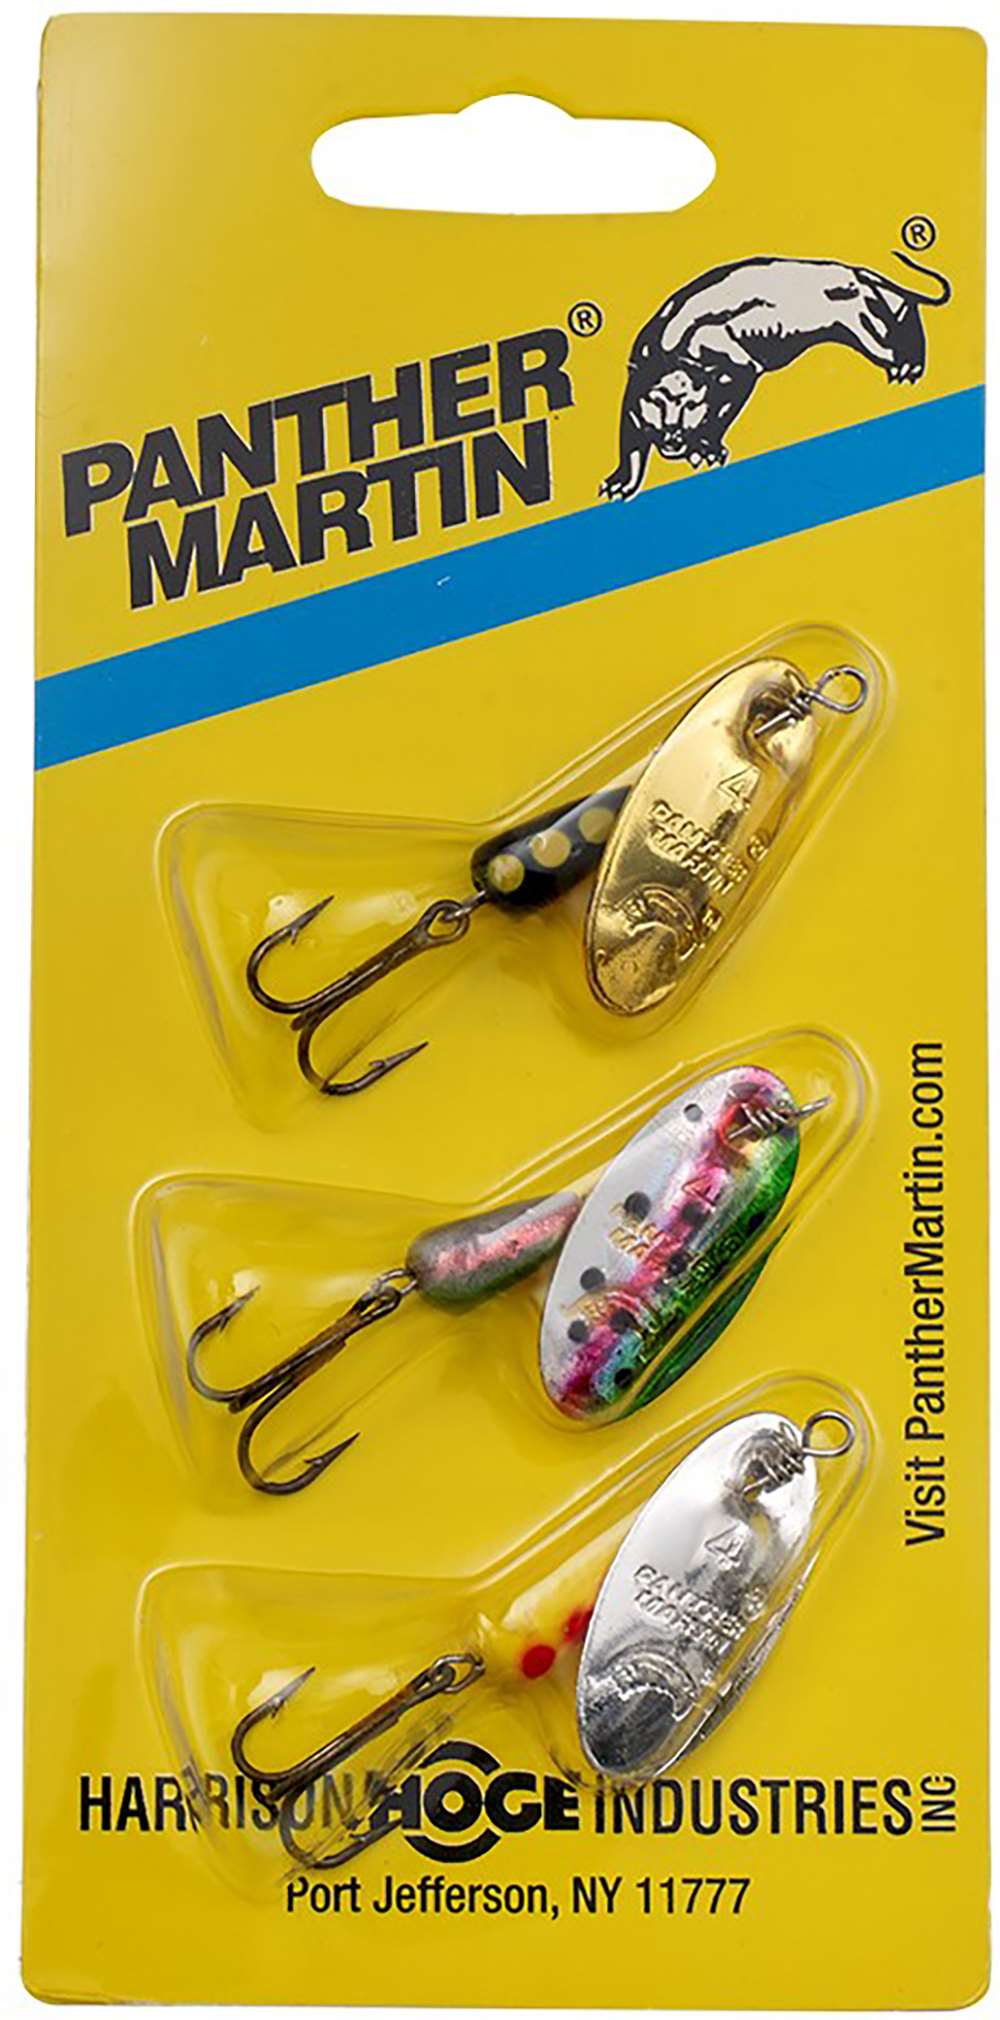 Panther Martin Kits - The Best Fishing Lure Kits for Trout, Bass, and More!  Save up to $31